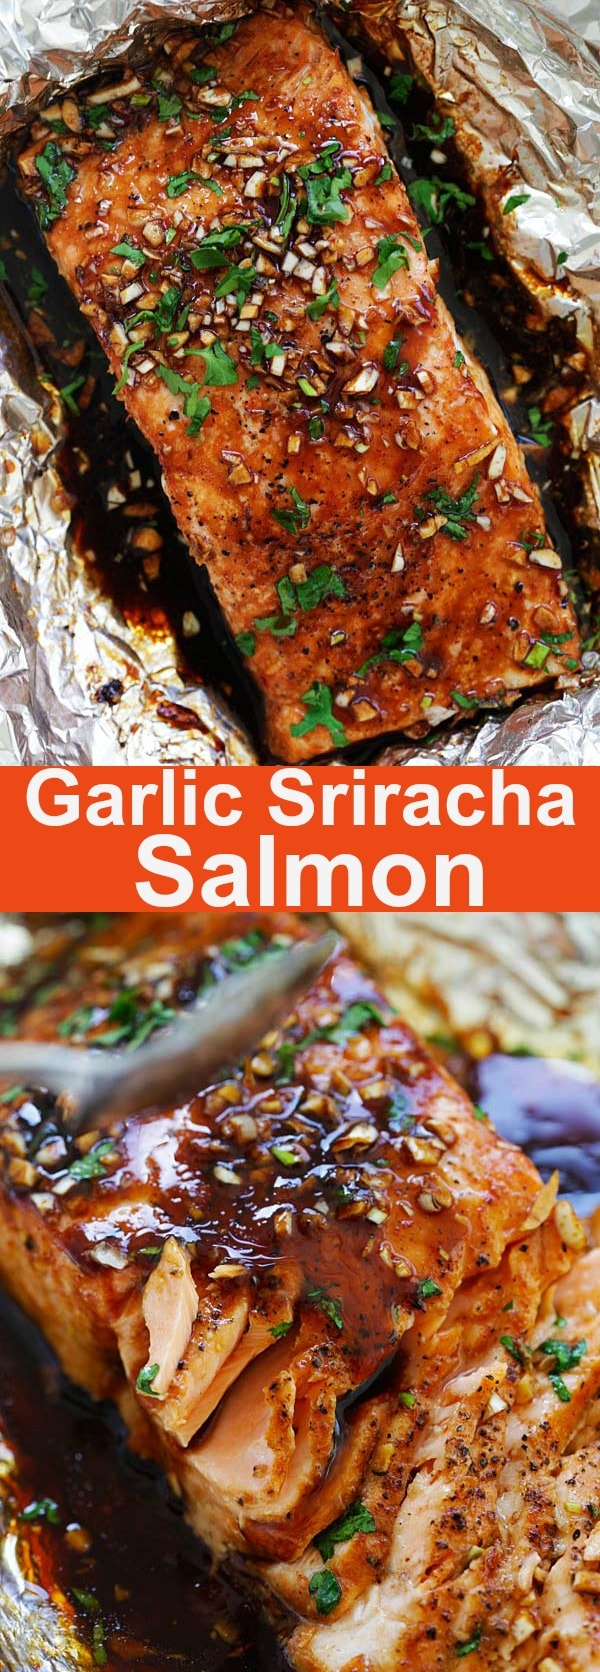 Garlic Sriracha Salmon - moist, juicy and flaky foil baked salmon recipe with a mouthwatering Garlic Sriracha marinade. This recipe takes only 10 minutes active time. It's so good | rasamalaysia.com